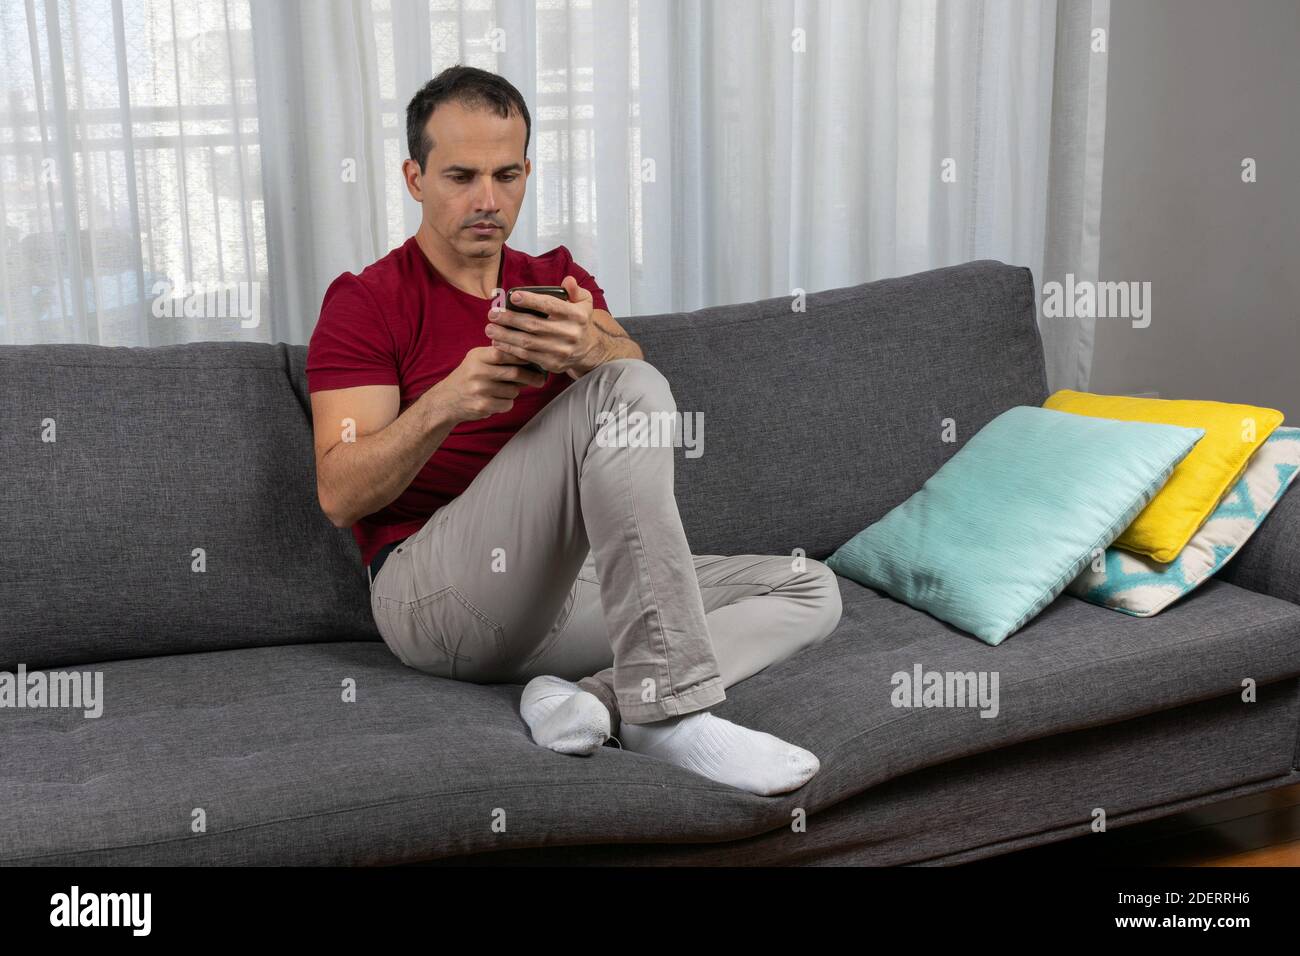 Mature man (44 years old) sitting on the couch and looking mindfully and holding his smartphone. Stock Photo